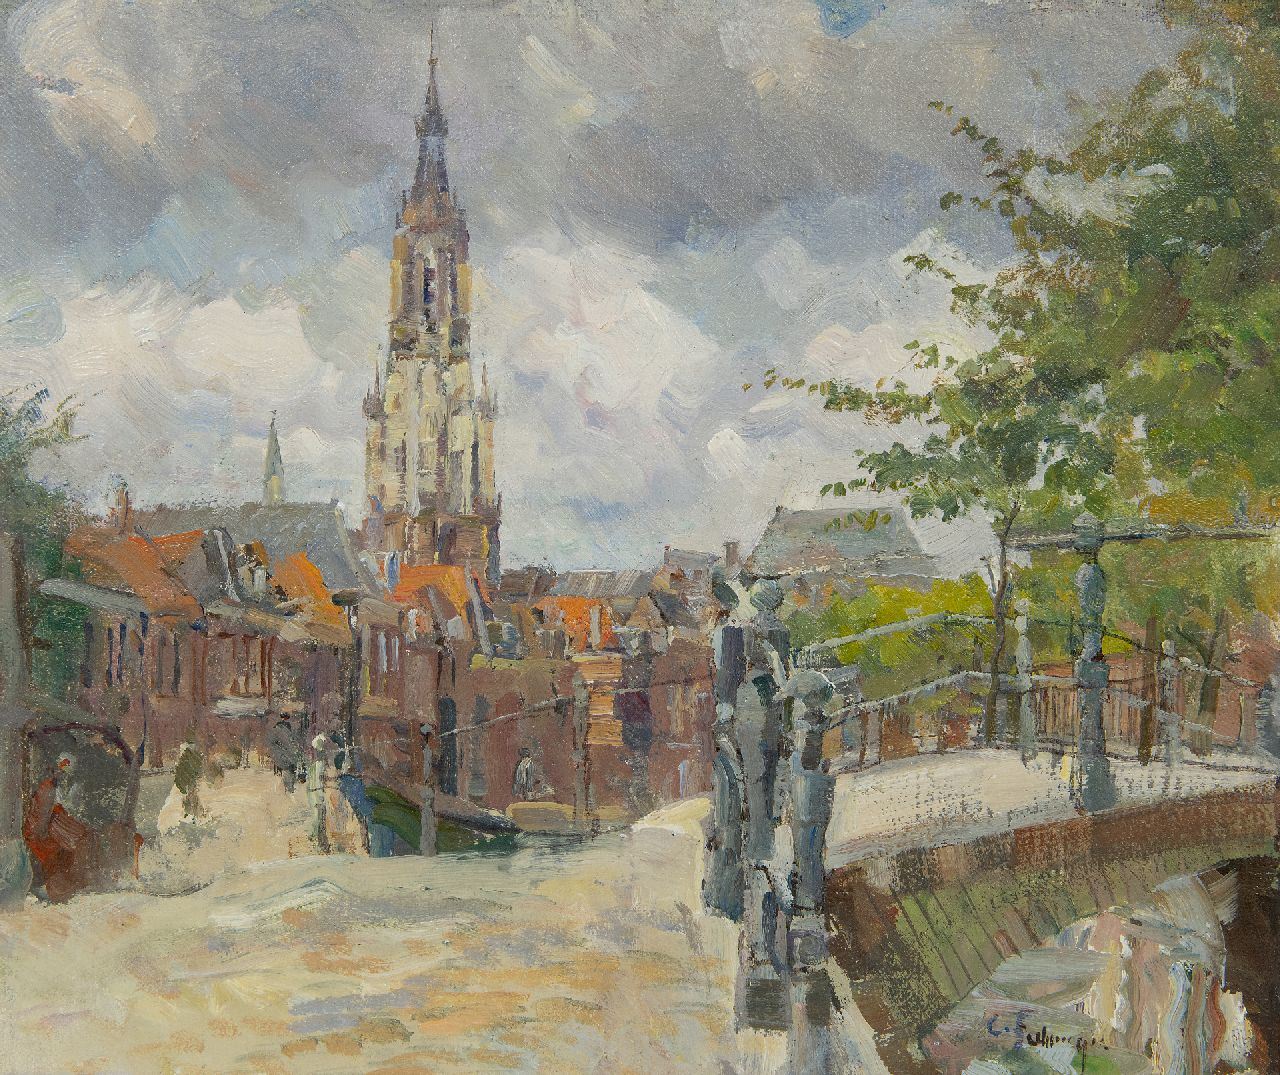 Fahringer C.  | Carl Fahringer | Paintings offered for sale | View on the Nieuwe Kerk, Delft, oil on canvas laid down on board 29.9 x 34.9 cm, signed l.r.